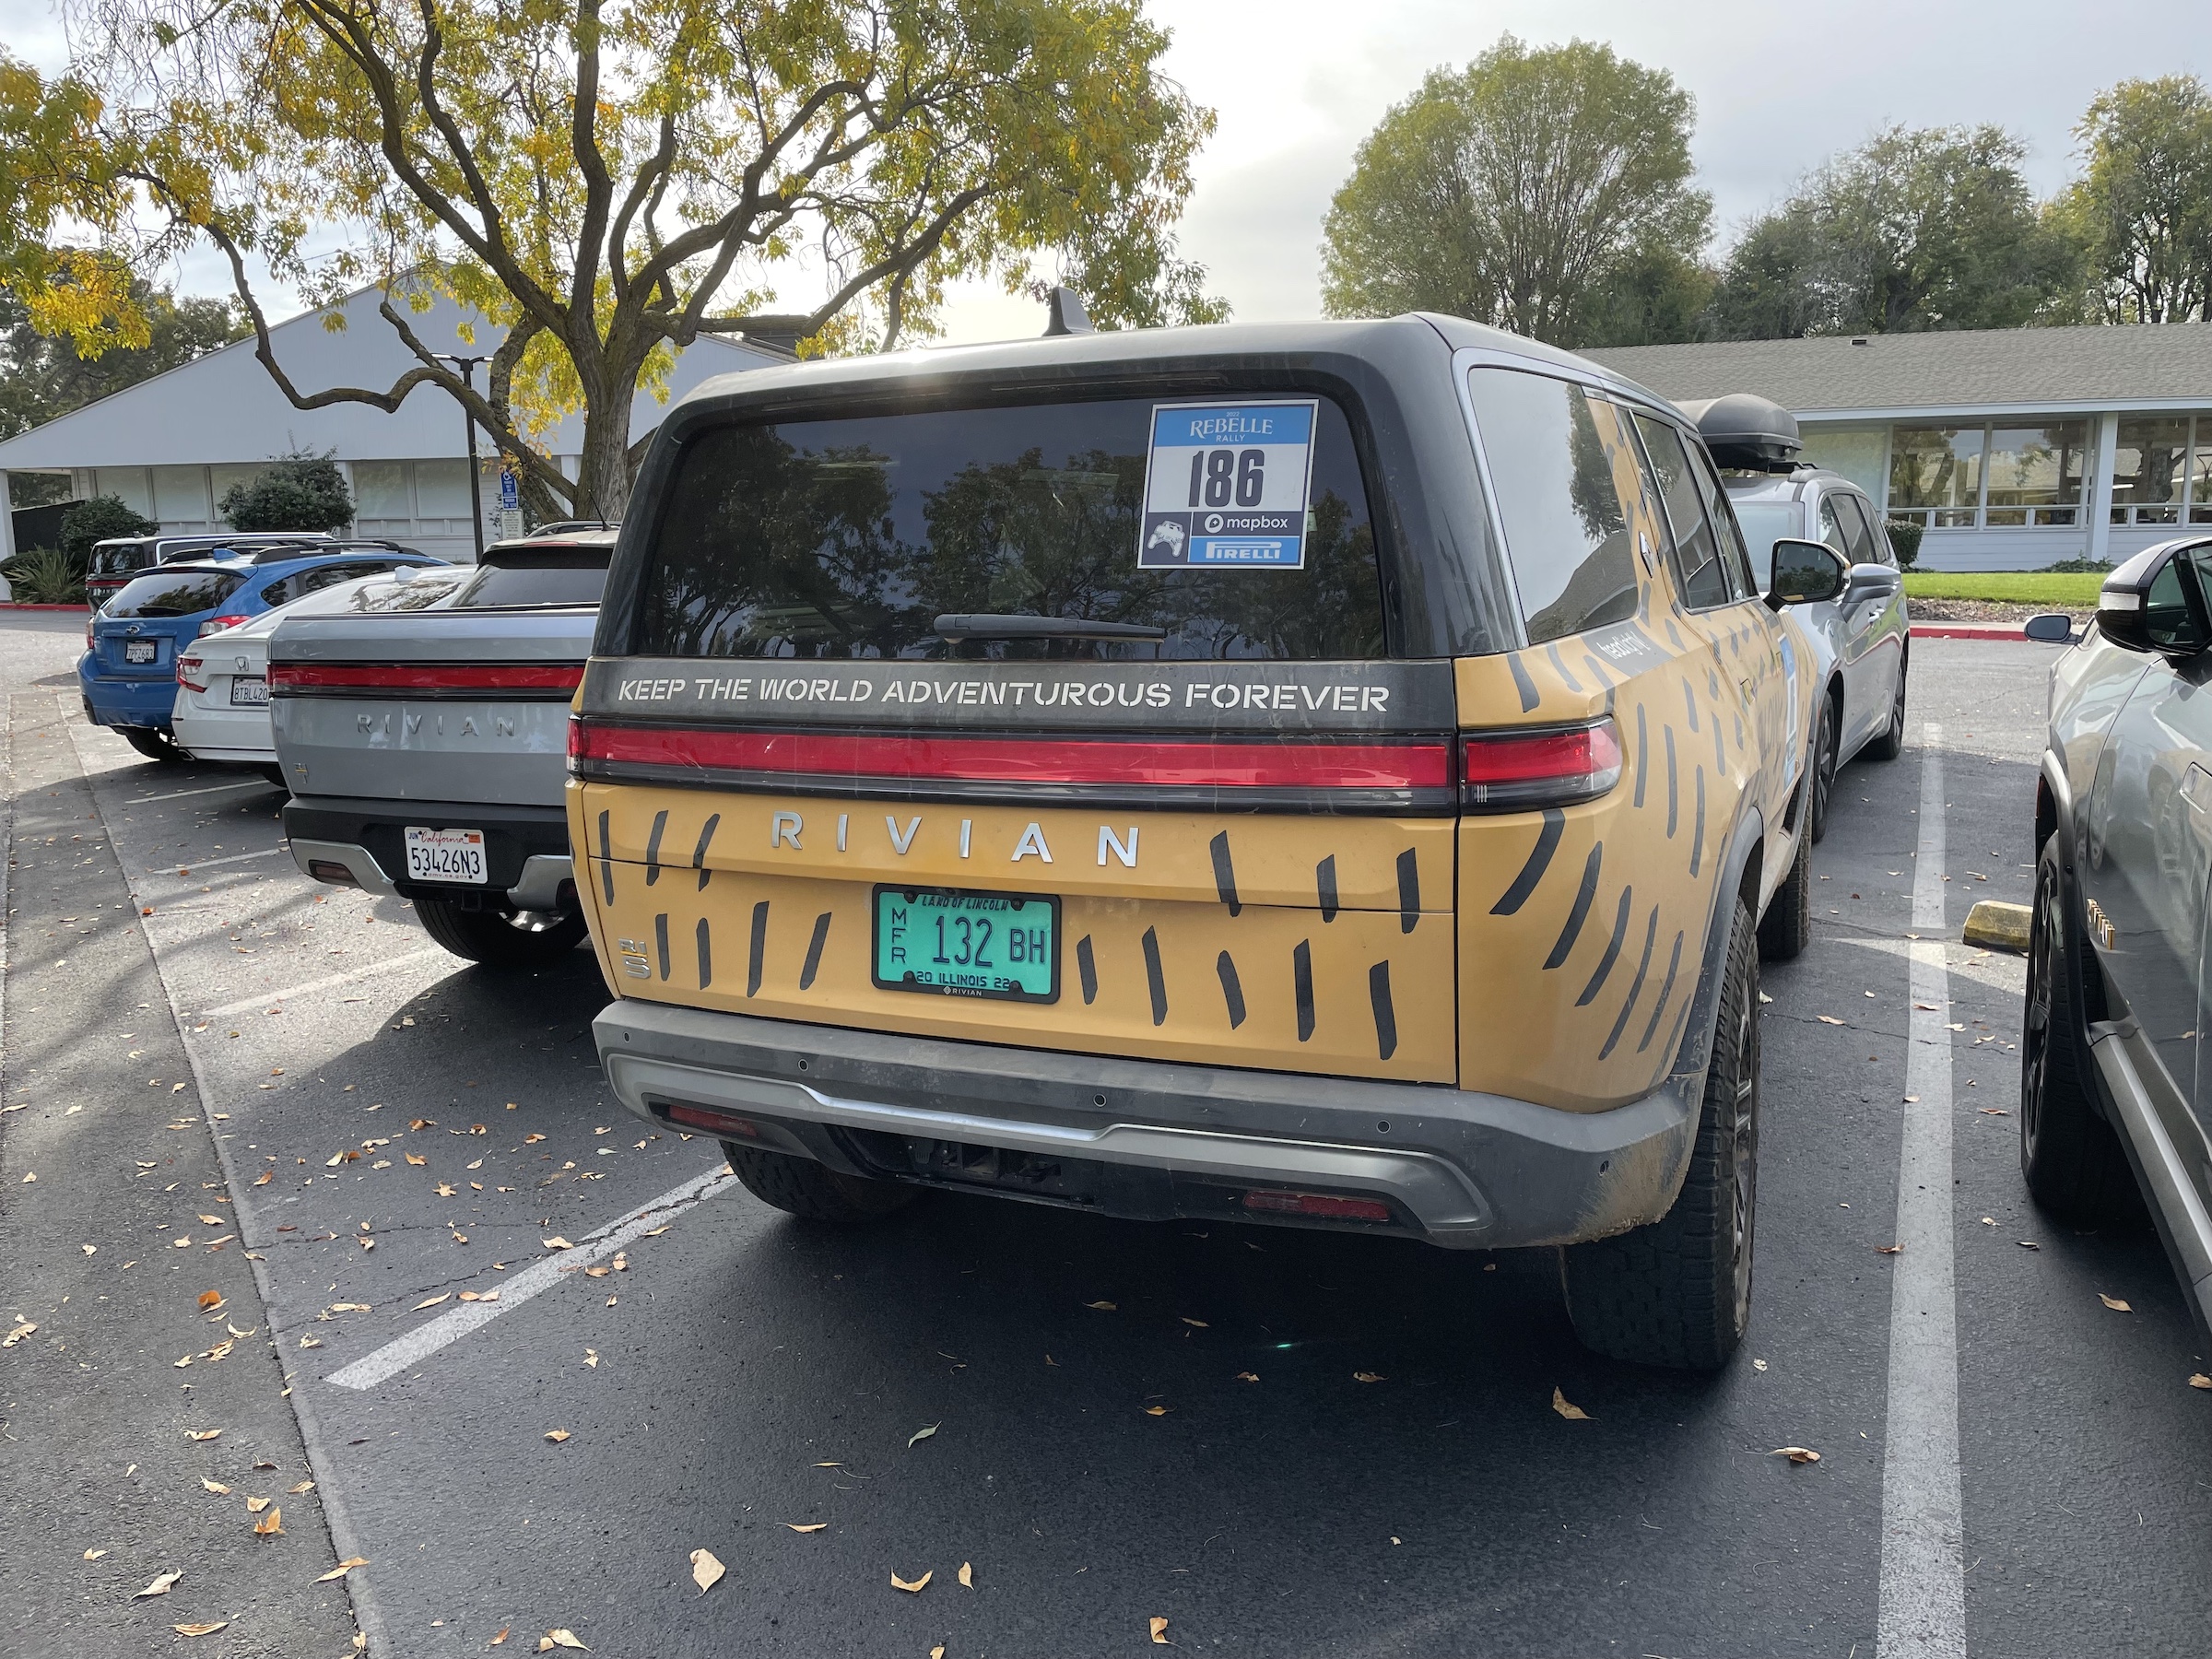 Rivian R1T R1S Rebelle Rally 2022 will feature R1T and R1S teams Rebelle3